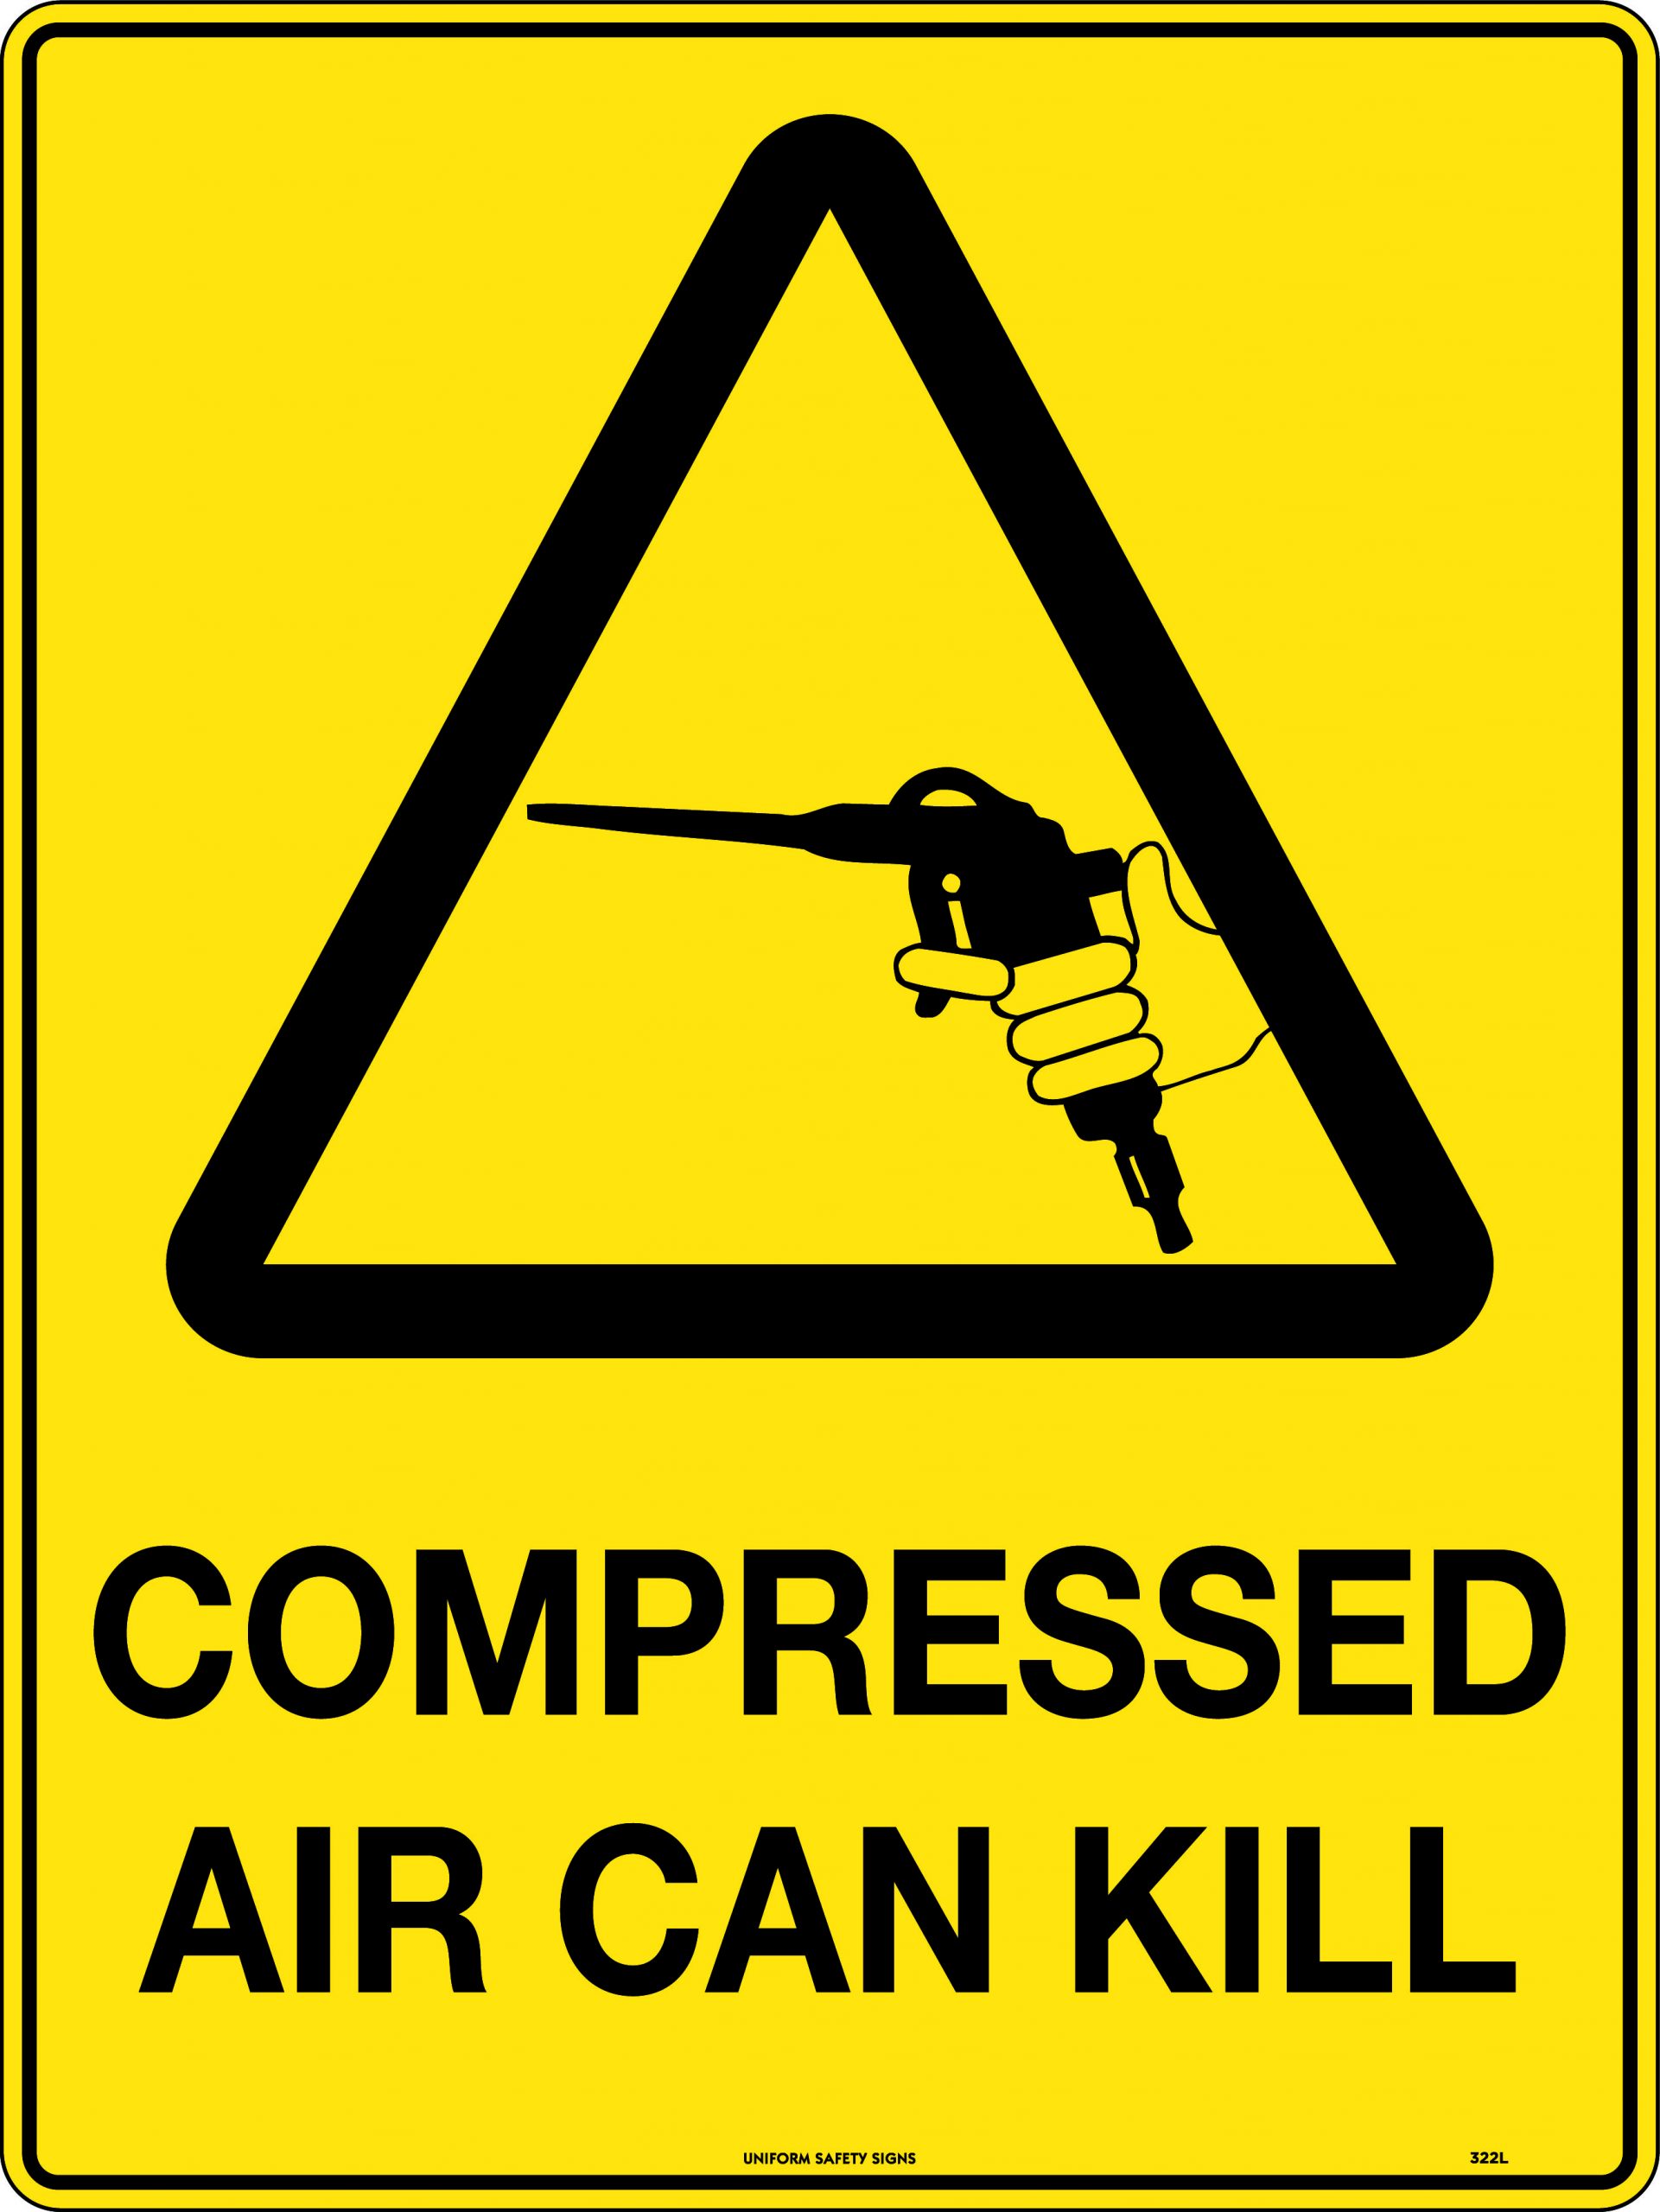 UNIFORM SAFETY 450X300MM METAL CAUTION COMPRESSED AIR CAN KILL